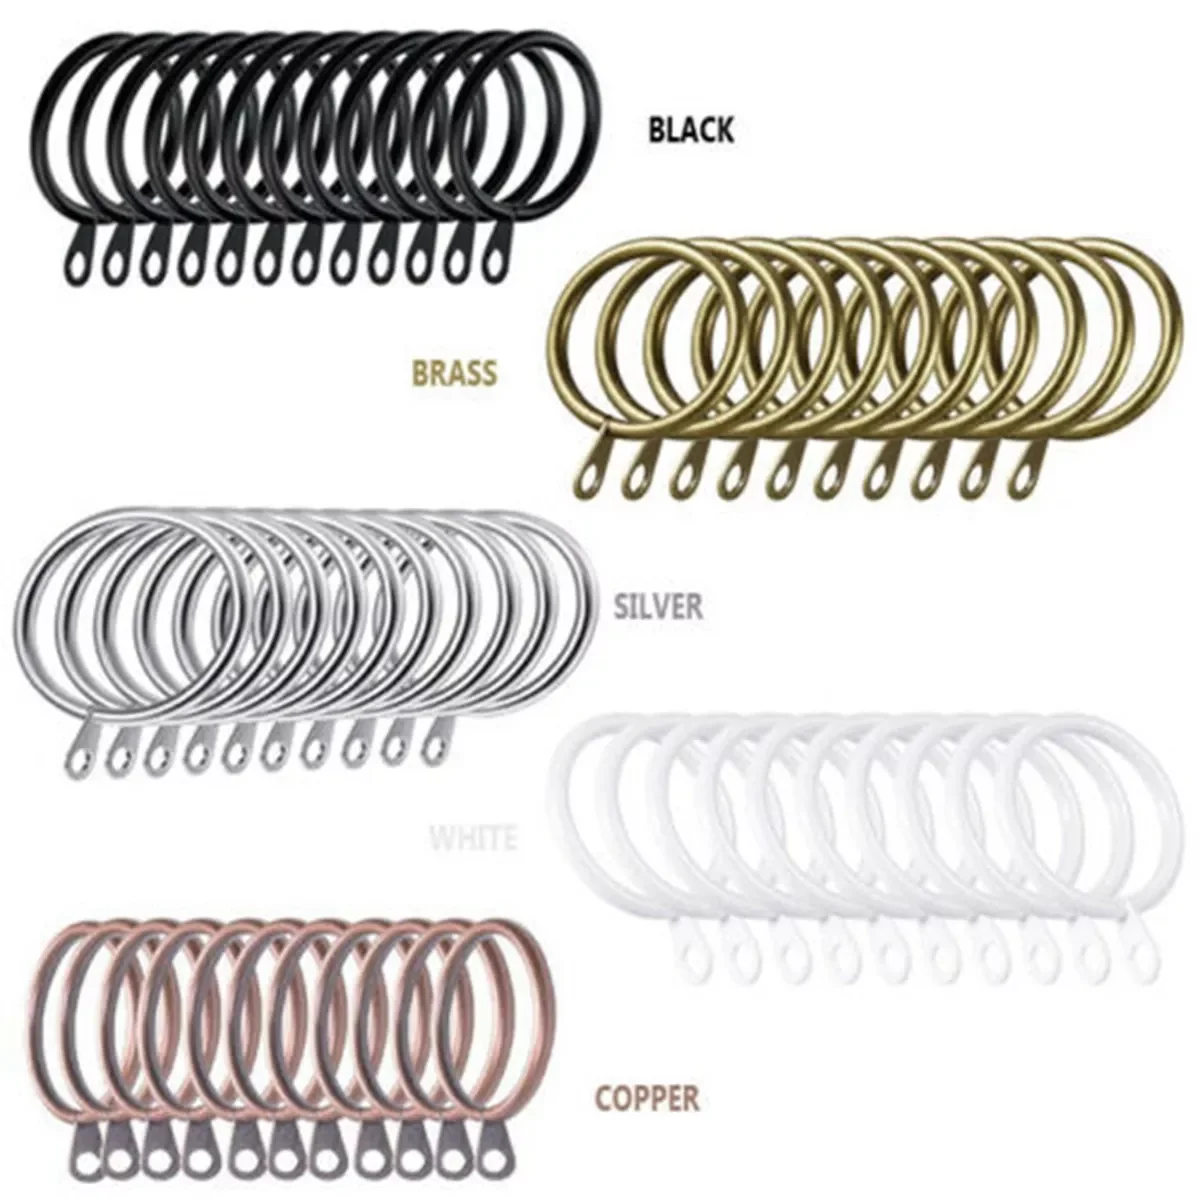 

6/12/24/36/48/60/72/84/96PCS Curtain Rings Metal Curtain Rings Hanging Hooks for Curtains Rods Pole Voile Heavy Duty Rings